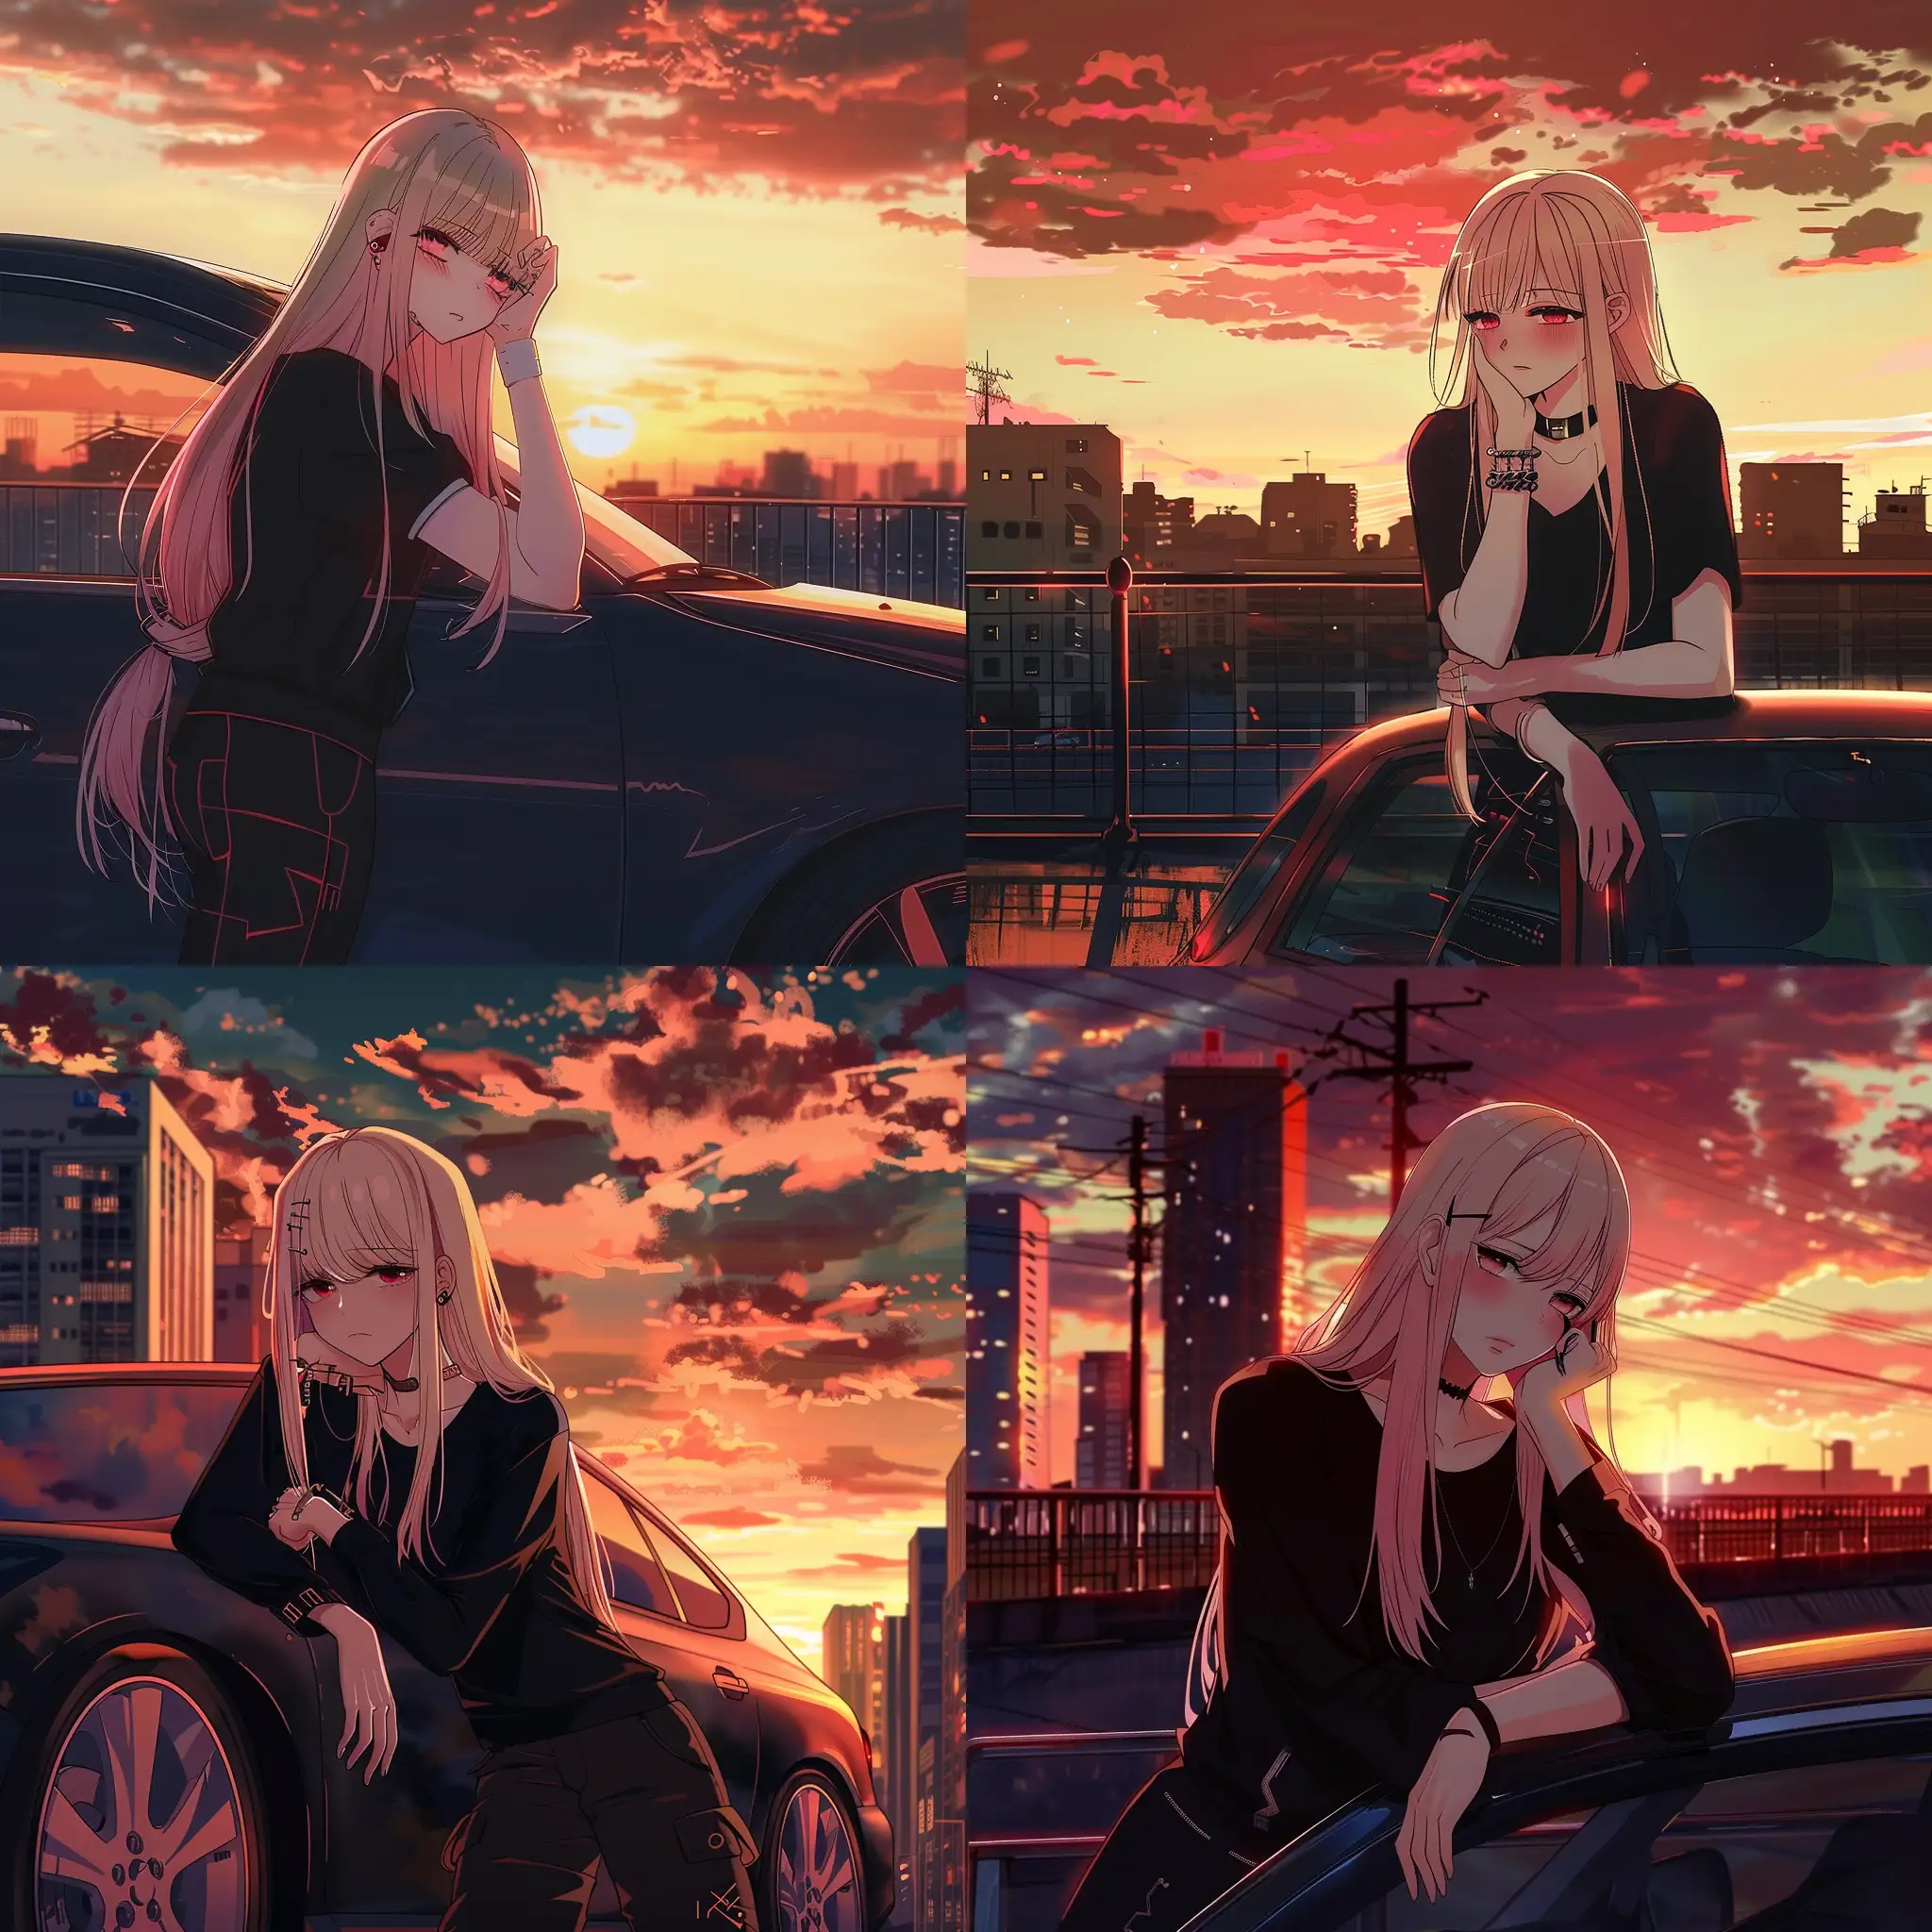 anime, style cyberpunk, car, leans on the car, outside the city, biker suit, sunset
